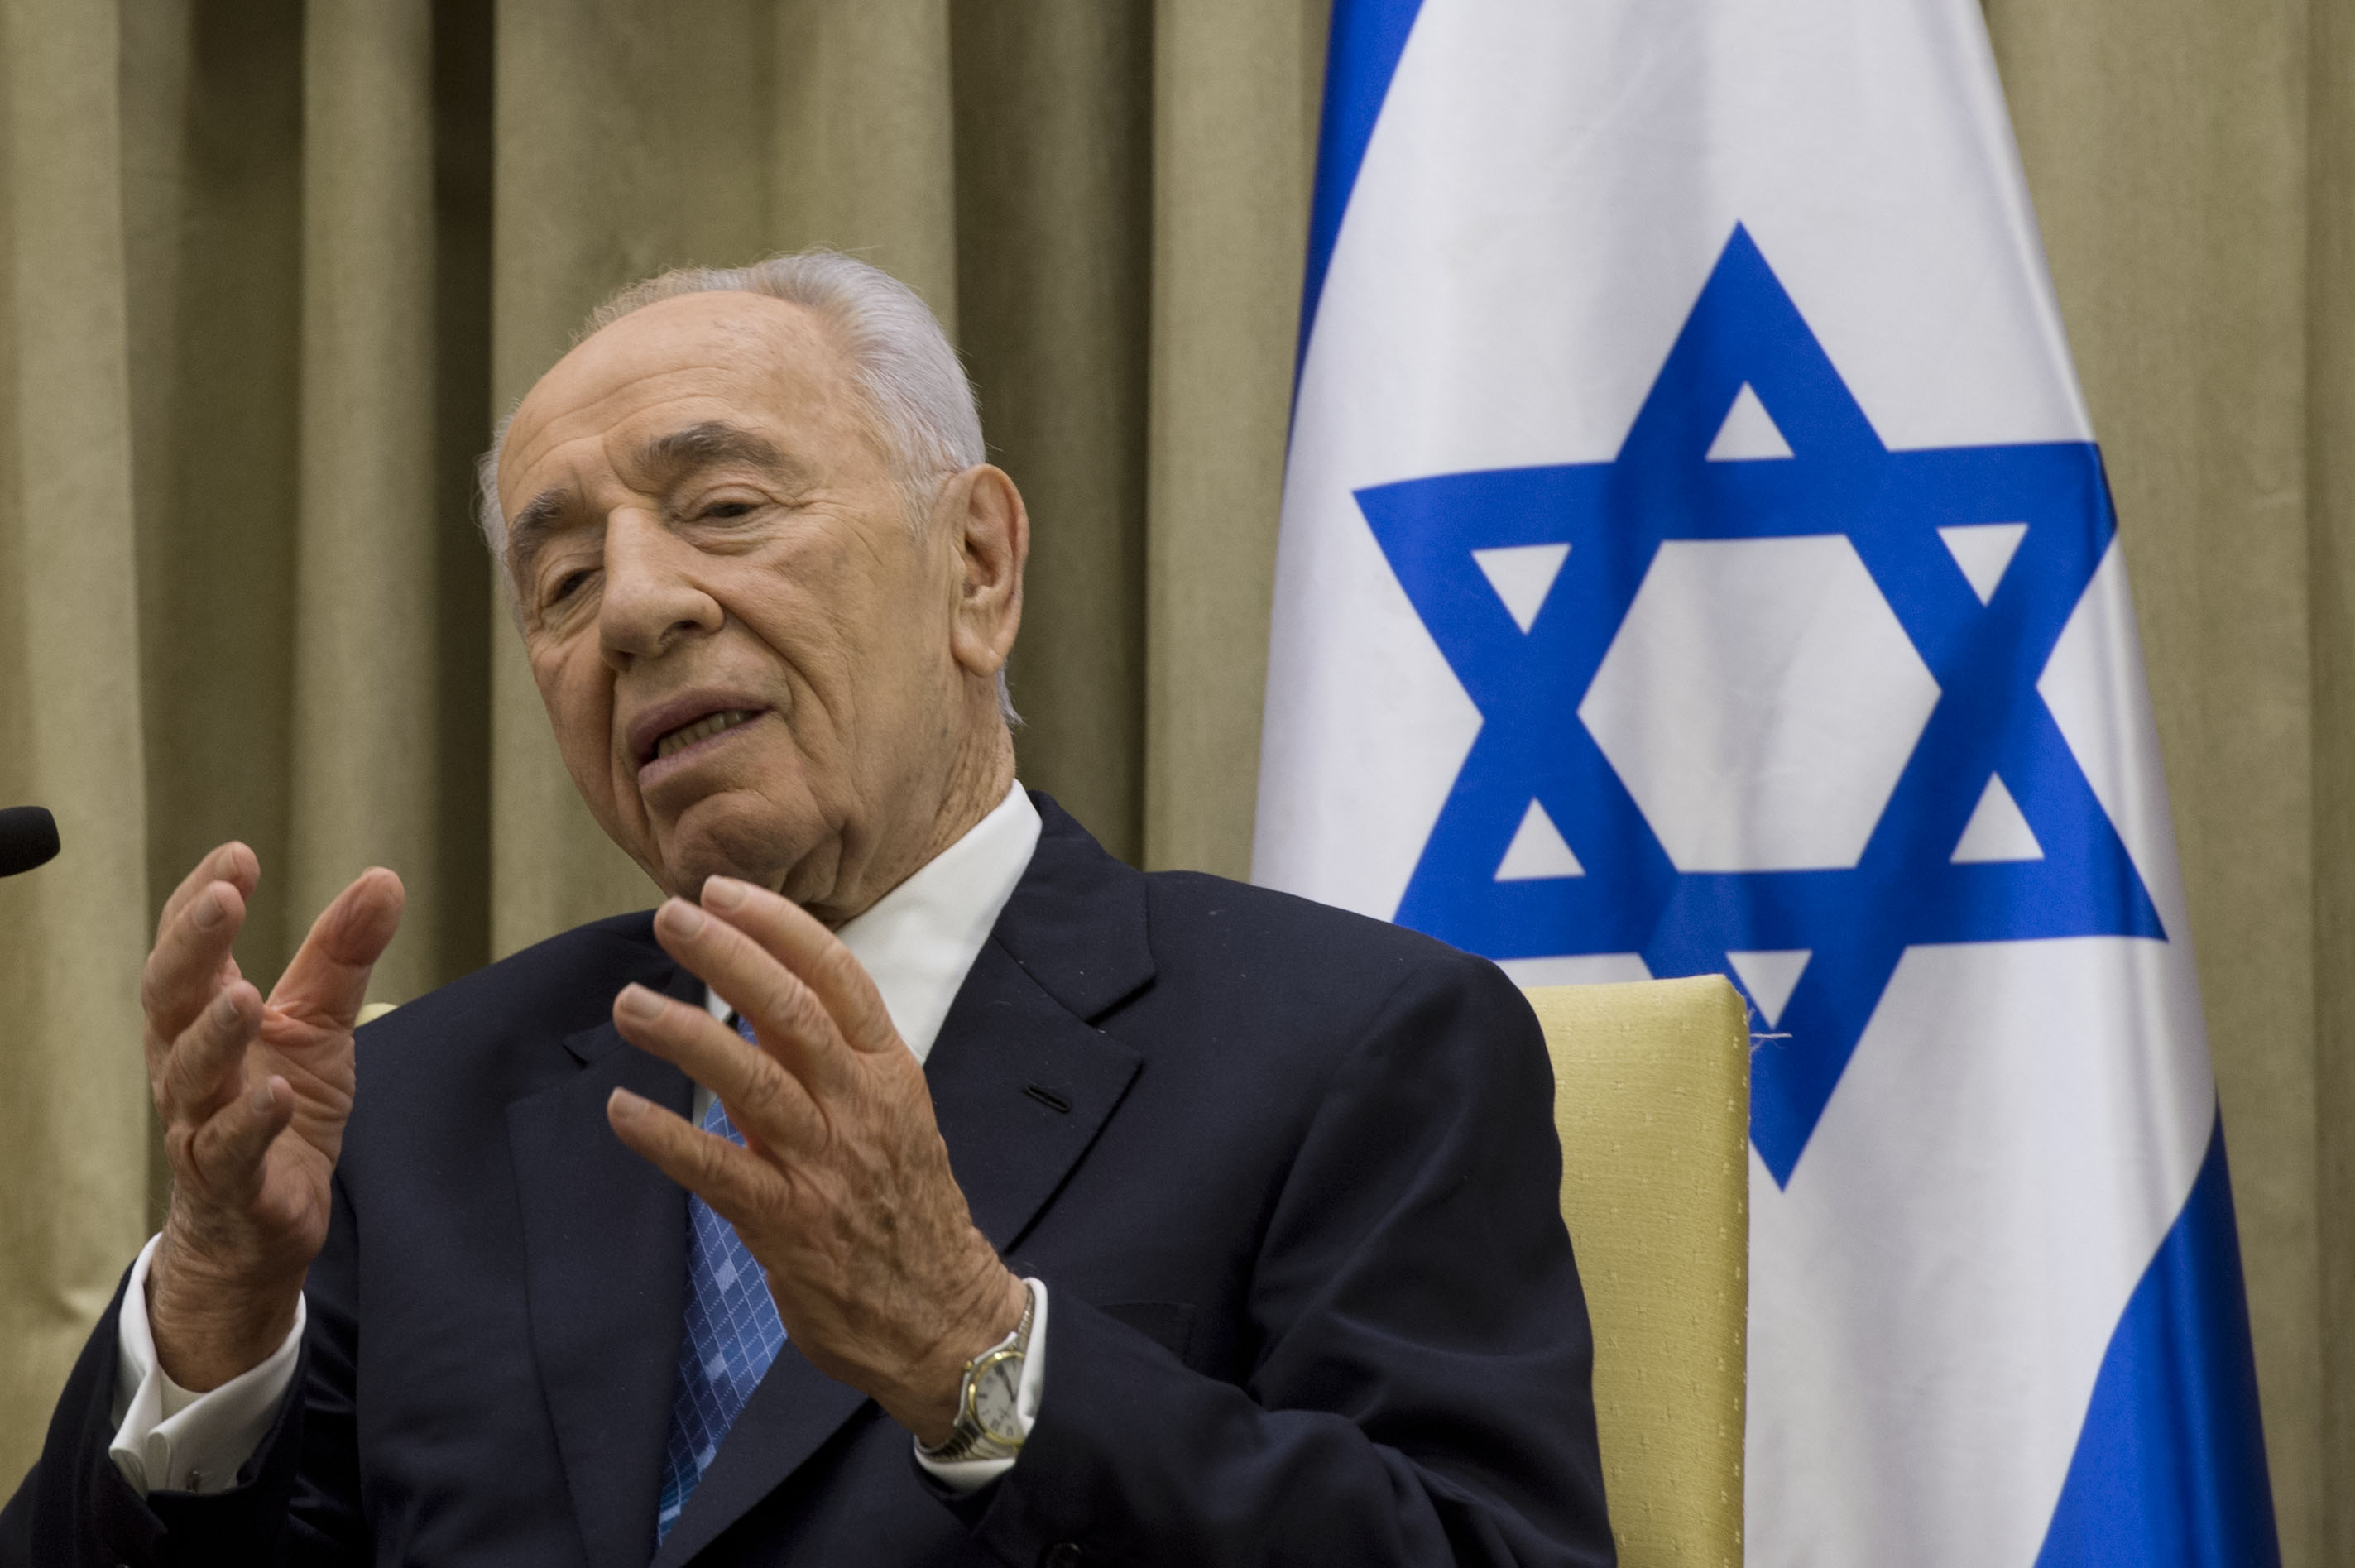 Shimon Peres in 2013. Credit: Wikimedia Commons